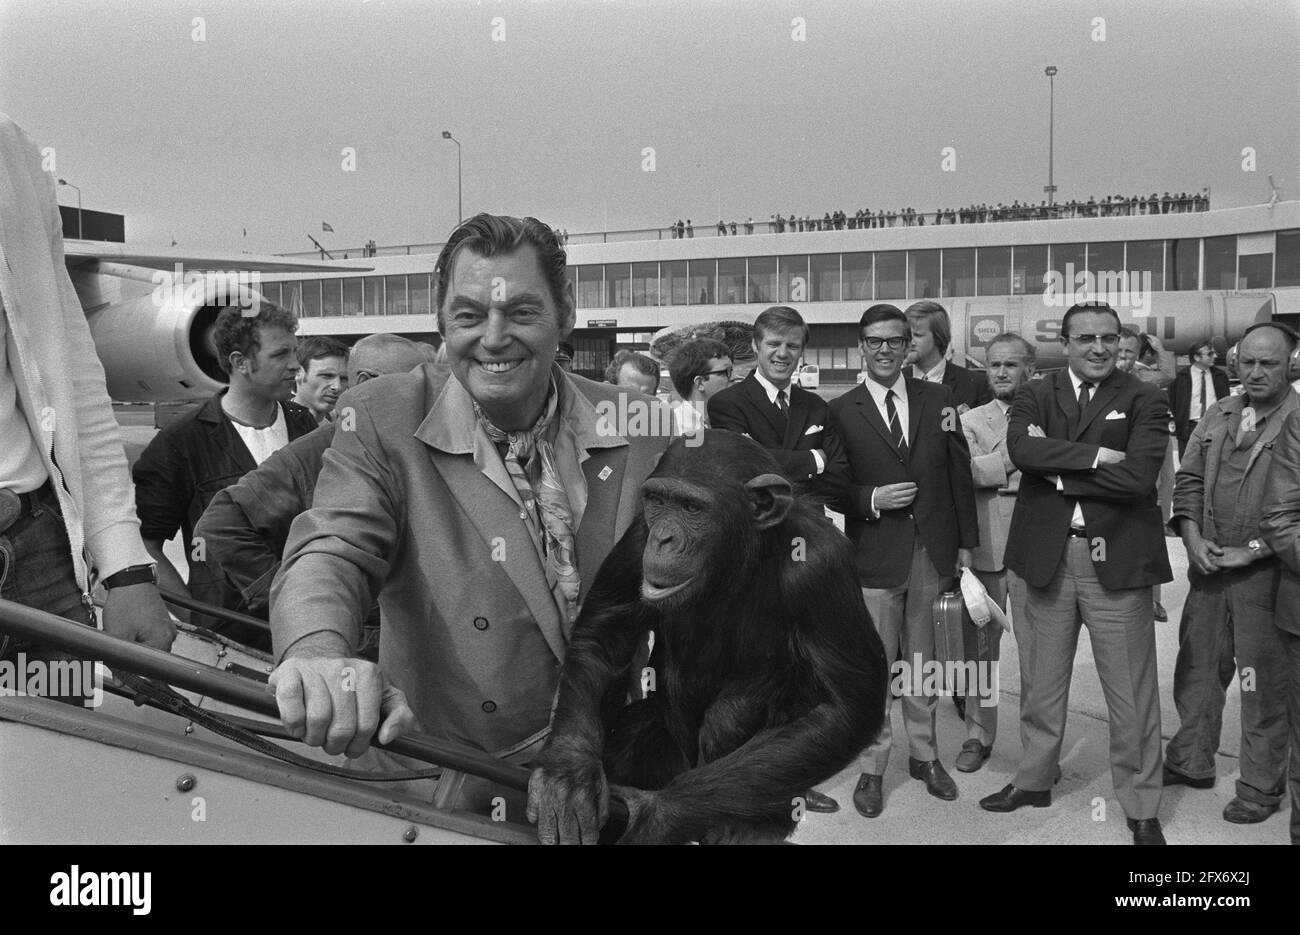 Actors Raymond Burr and ex-Tarzan Johnny Weismuller (USA) arrive at Schiphol Airport; Weismuller with monkey, June 24, 1970, ACTORS, actors, The Netherlands, 20th century press agency photo, news to remember, documentary, historic photography 1945-1990, visual stories, human history of the Twentieth Century, capturing moments in time Stock Photo